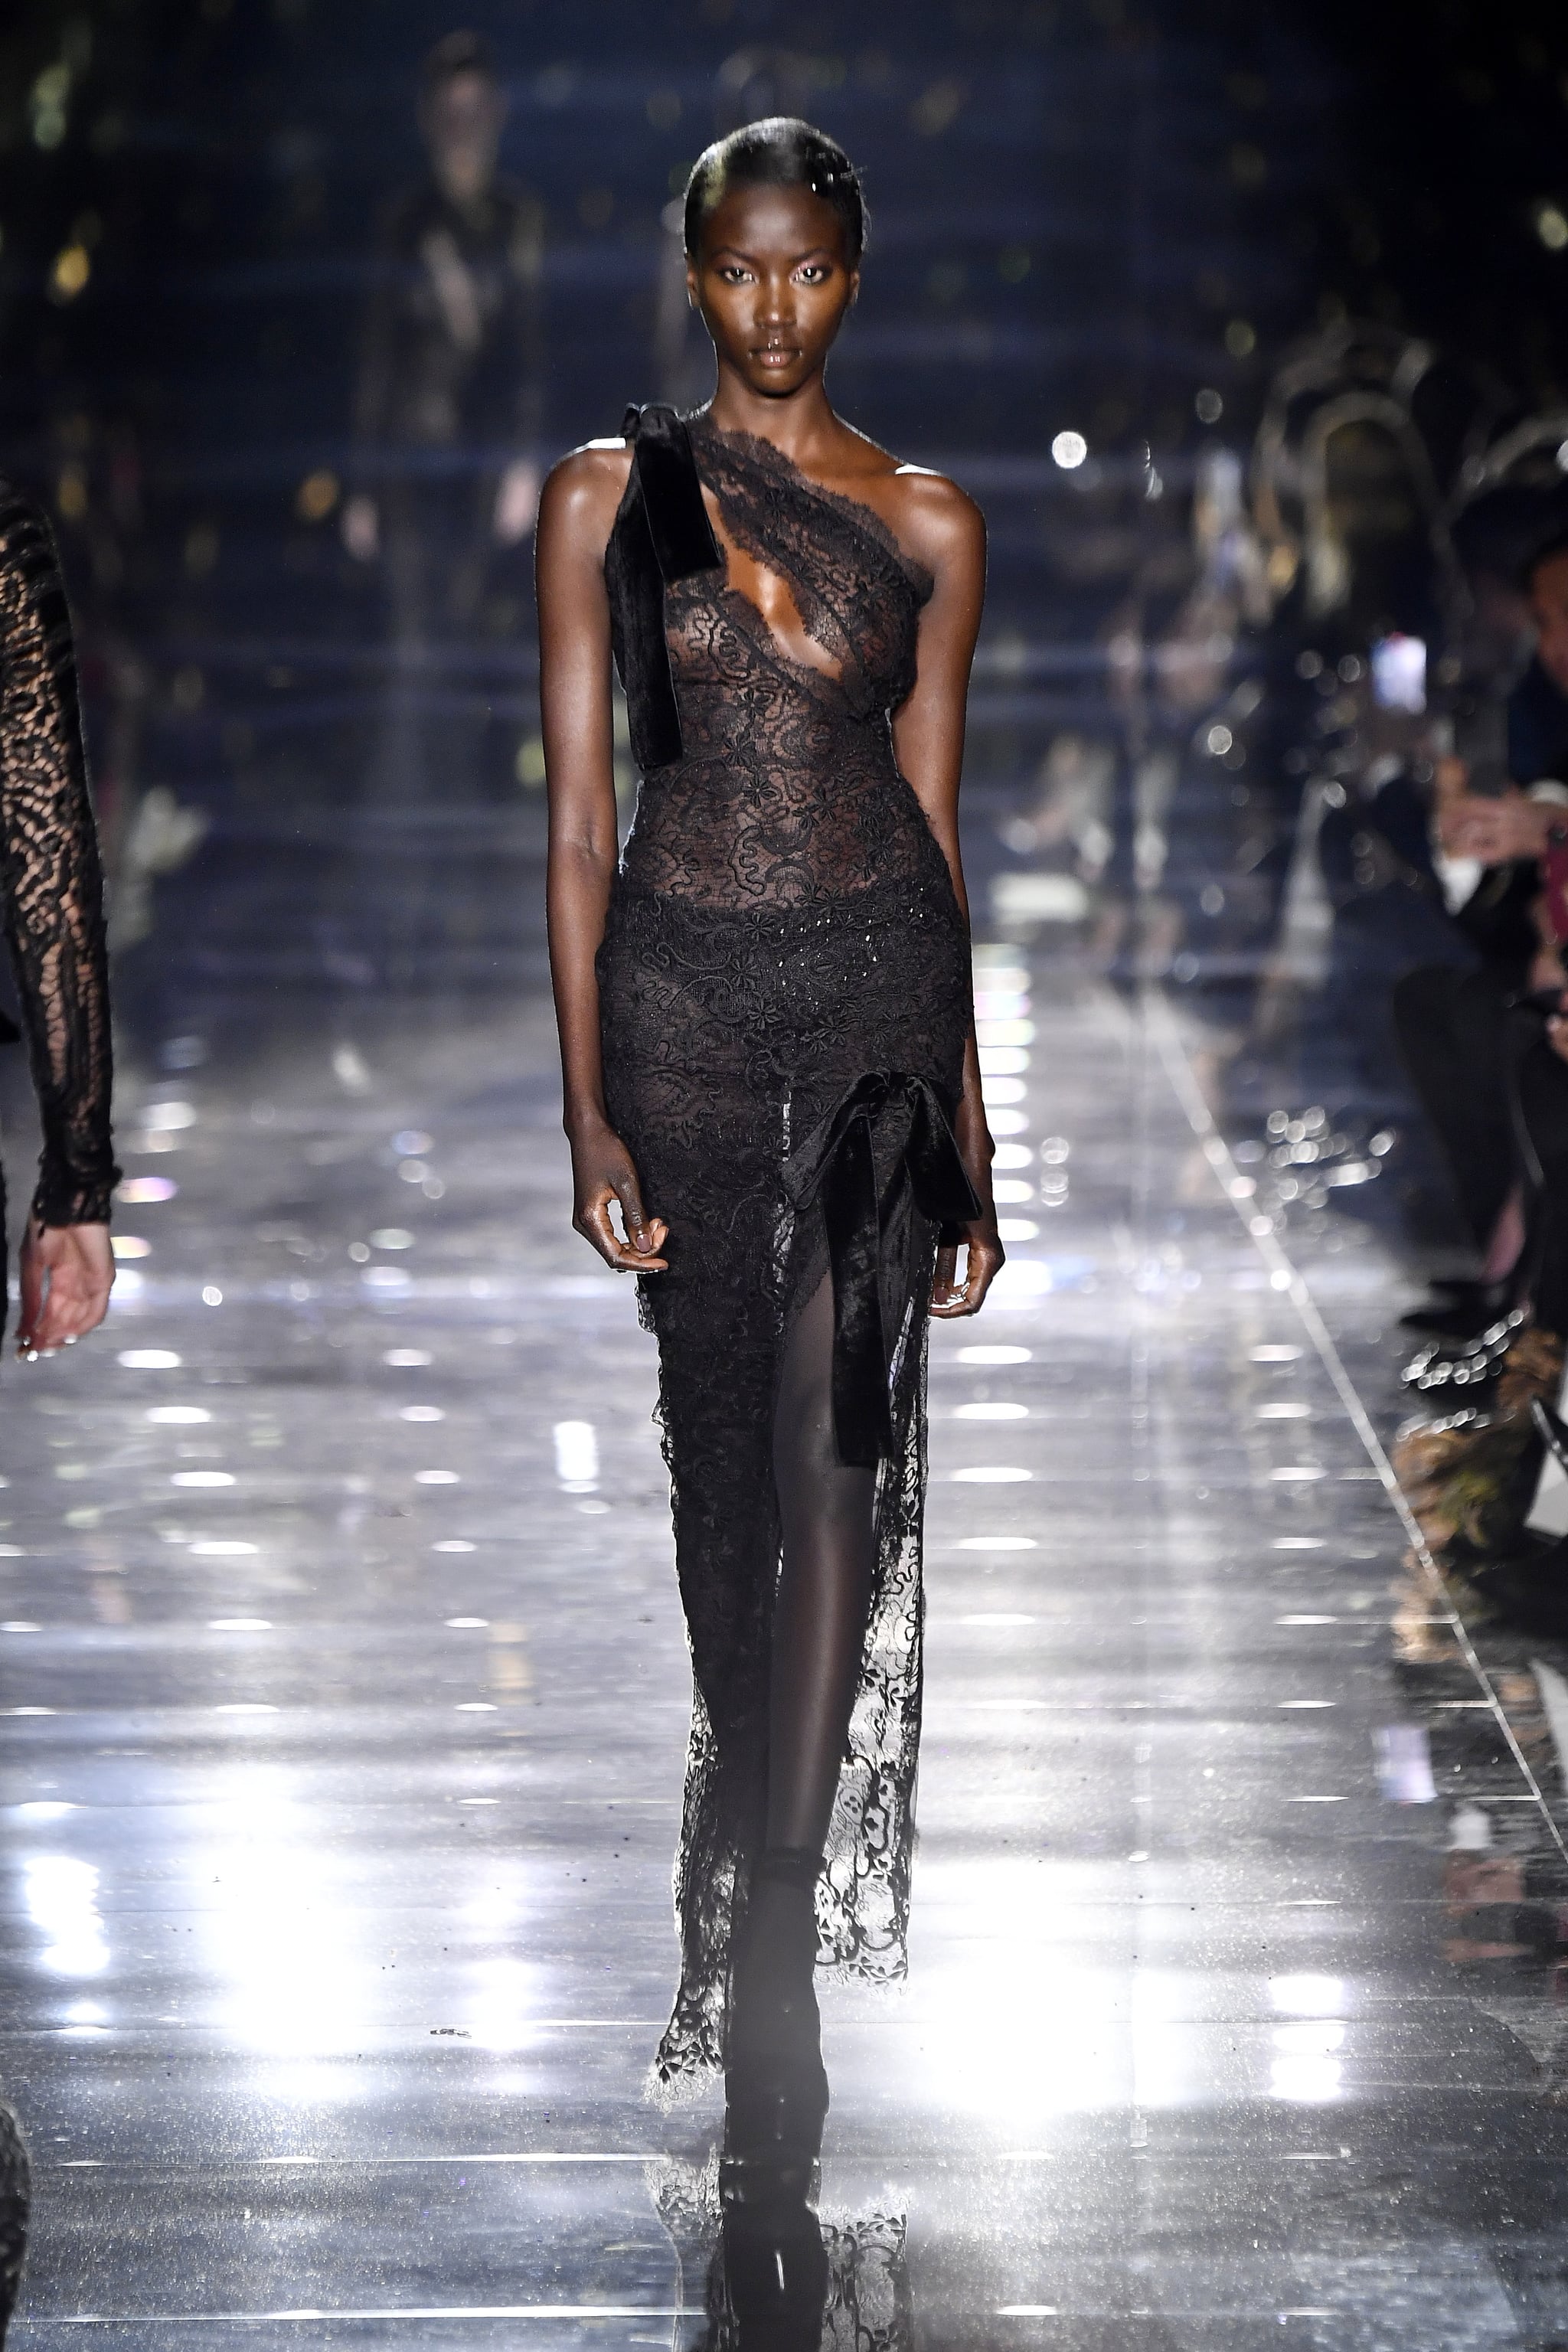 Tom Ford Autumn/Winter 2020 | Boudoir Fashion Is the Romantic Spring Trend  That Has Us Dreaming of a Walk-In Closet | POPSUGAR Fashion Photo 15